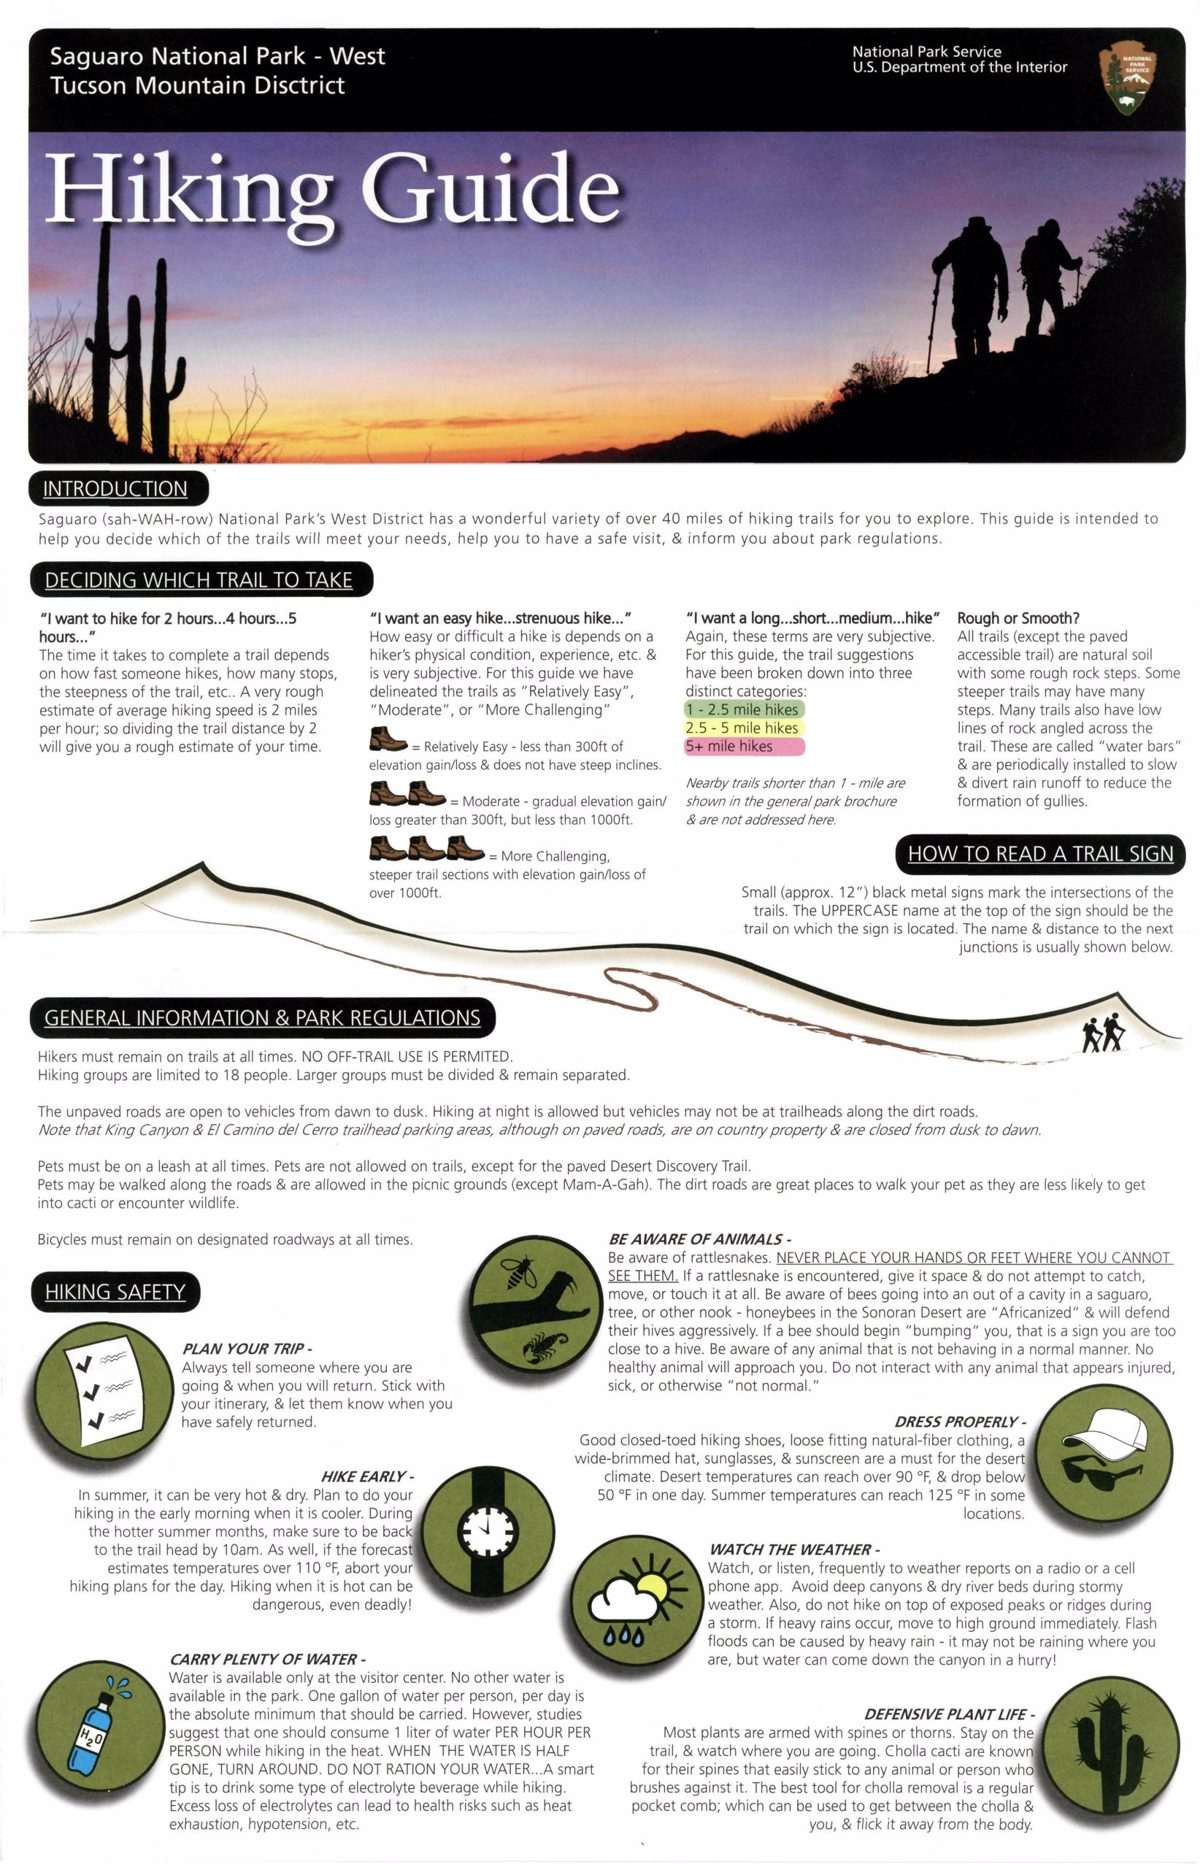 Saguaro National Park - West - Tucson Mountain District - Hiking Guide - 2019 Cover Page